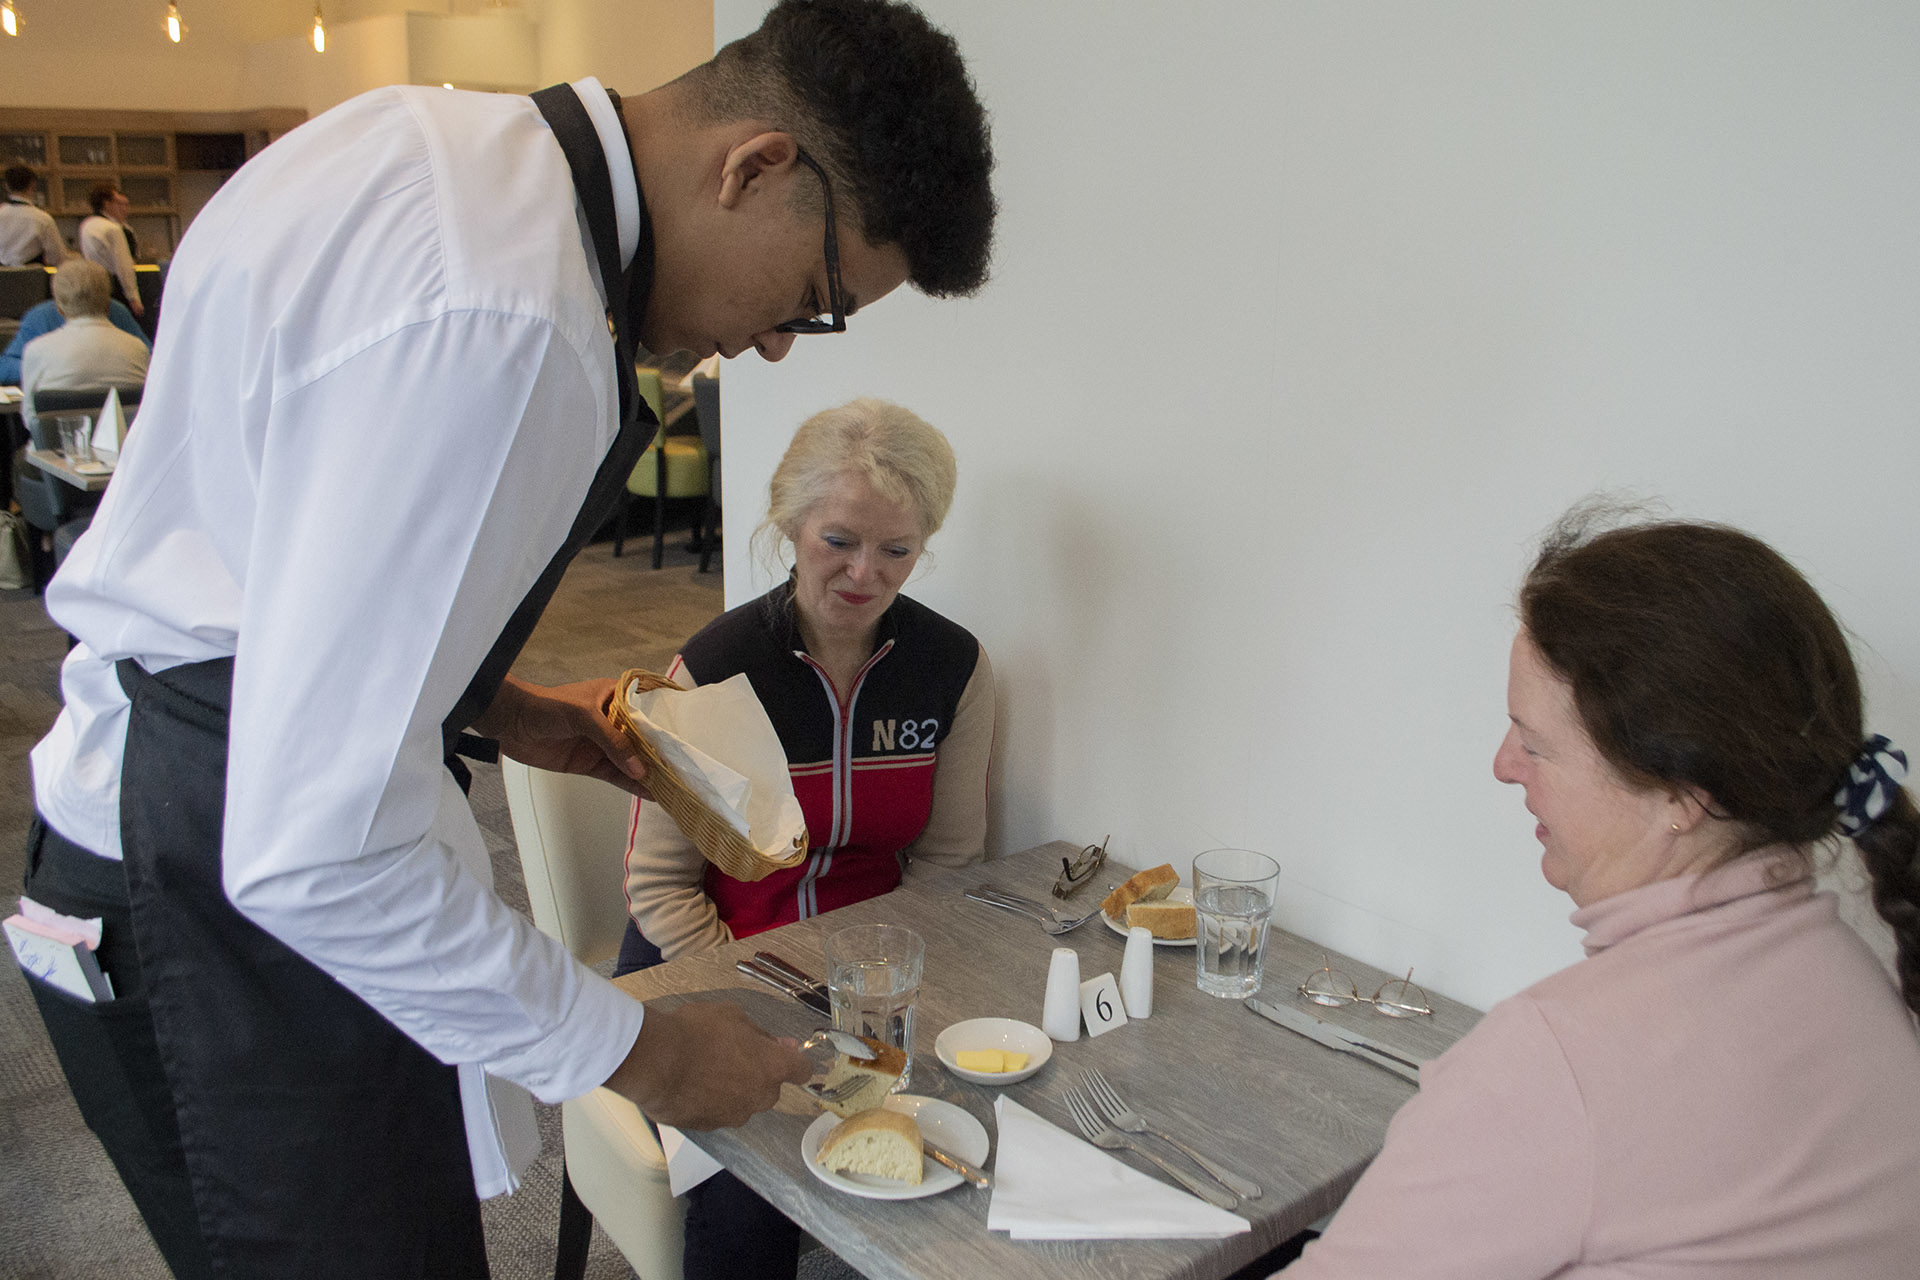 Hospitality - Student serving food